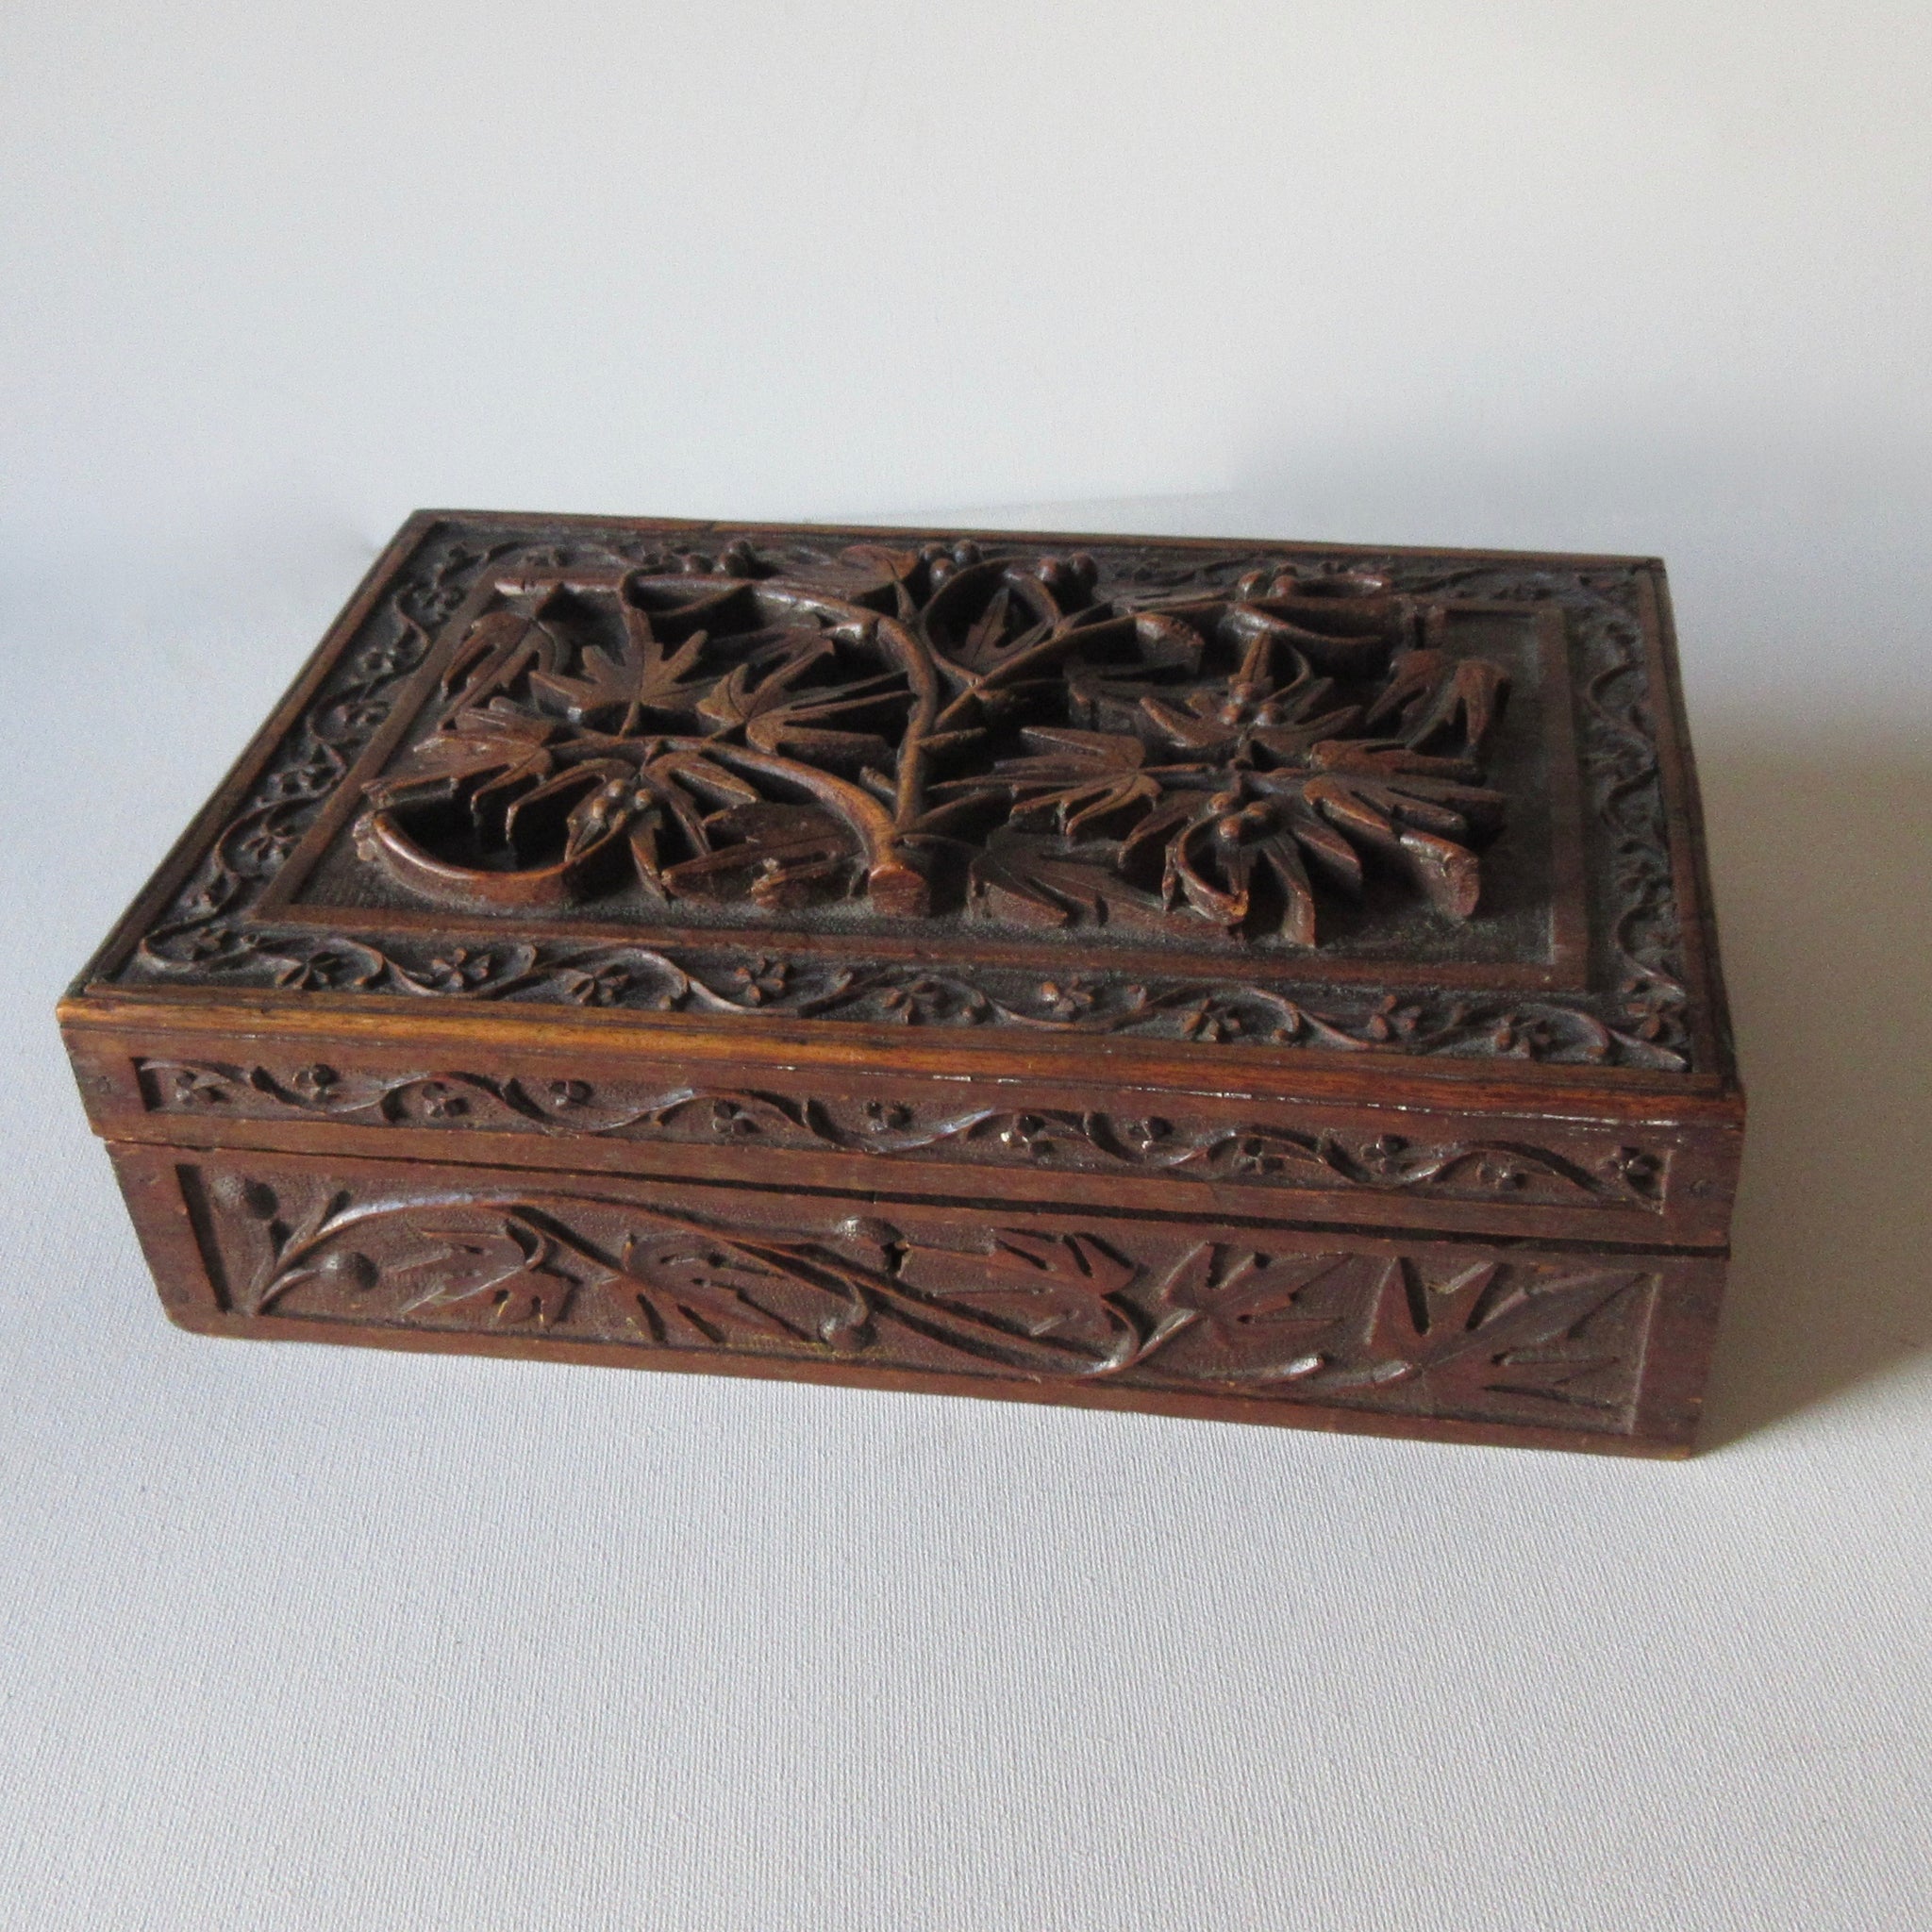 Wooden Carved Relief Jewelry Storage Box